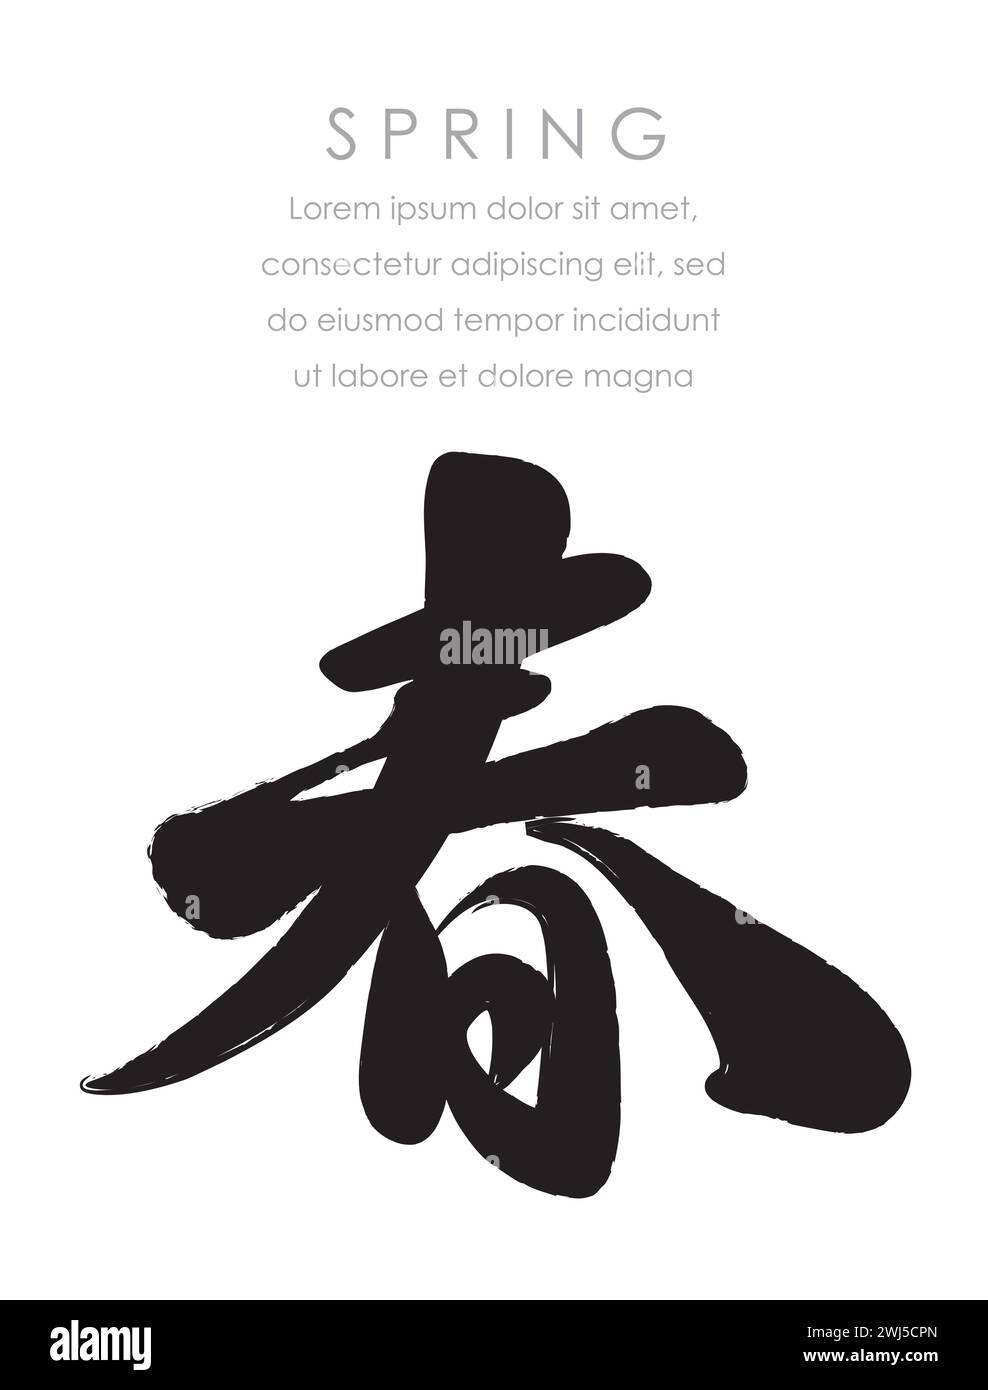 Japanese Kanji Character Calligraphy, HARU, Decorated With Vintage Patterns, Vector Illustration. Text Translation - Spring. Stock Vector